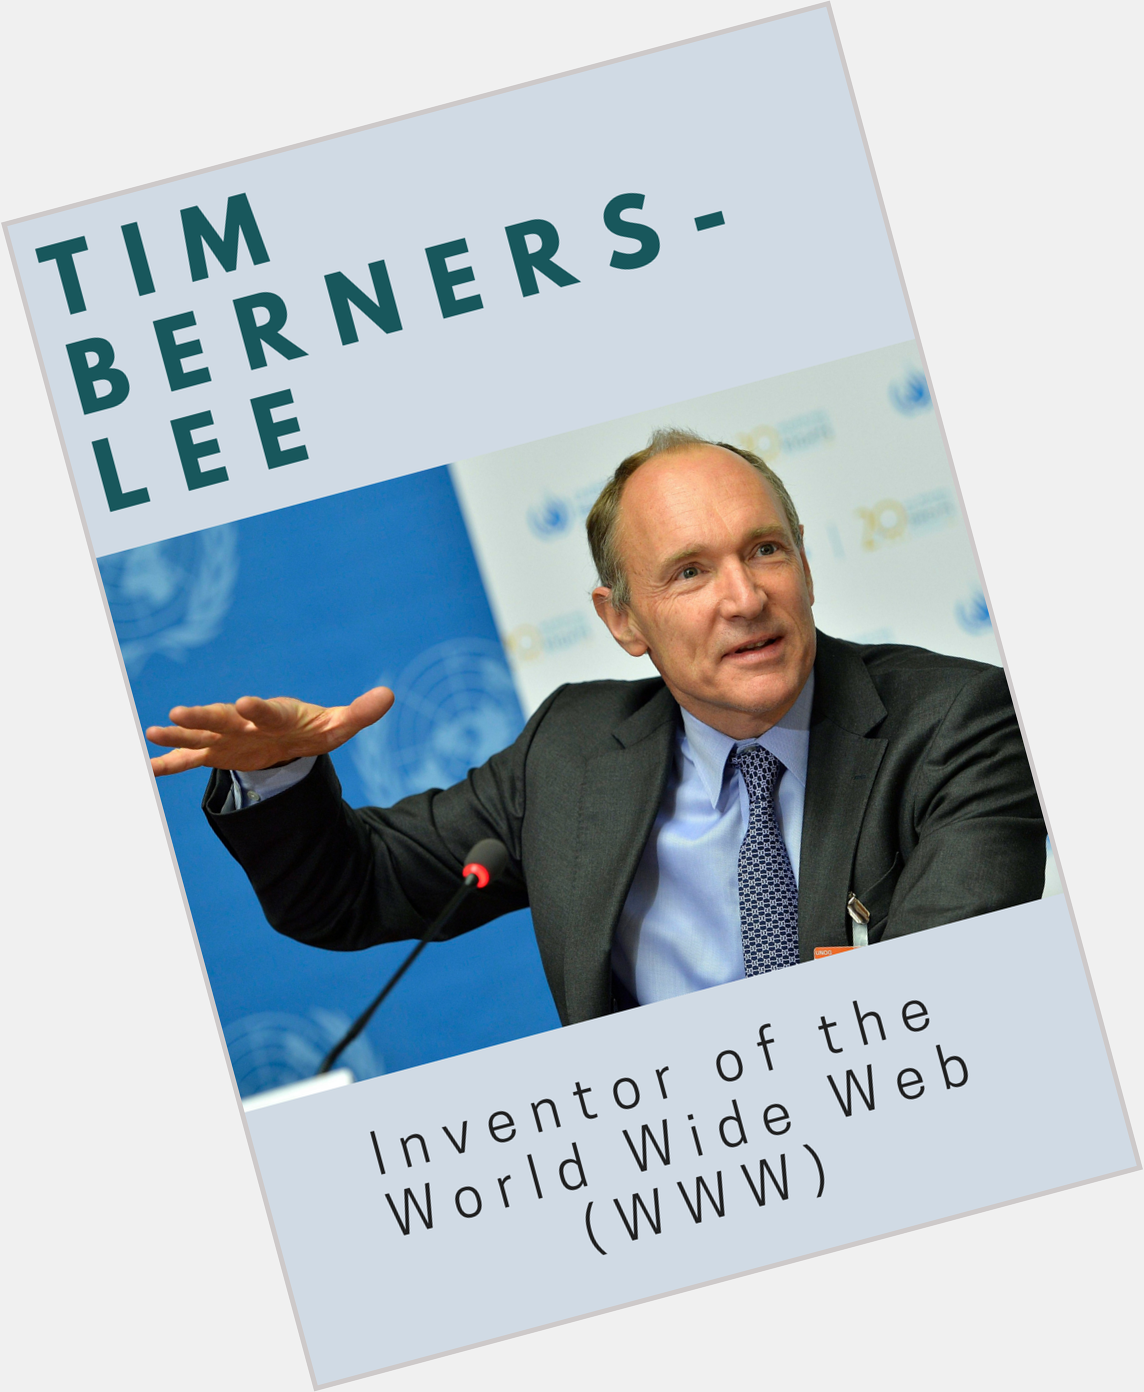  wishes Professor Sir Tim Berners-Lee, inventor of the World Wide Web a very Happy Birthday! 